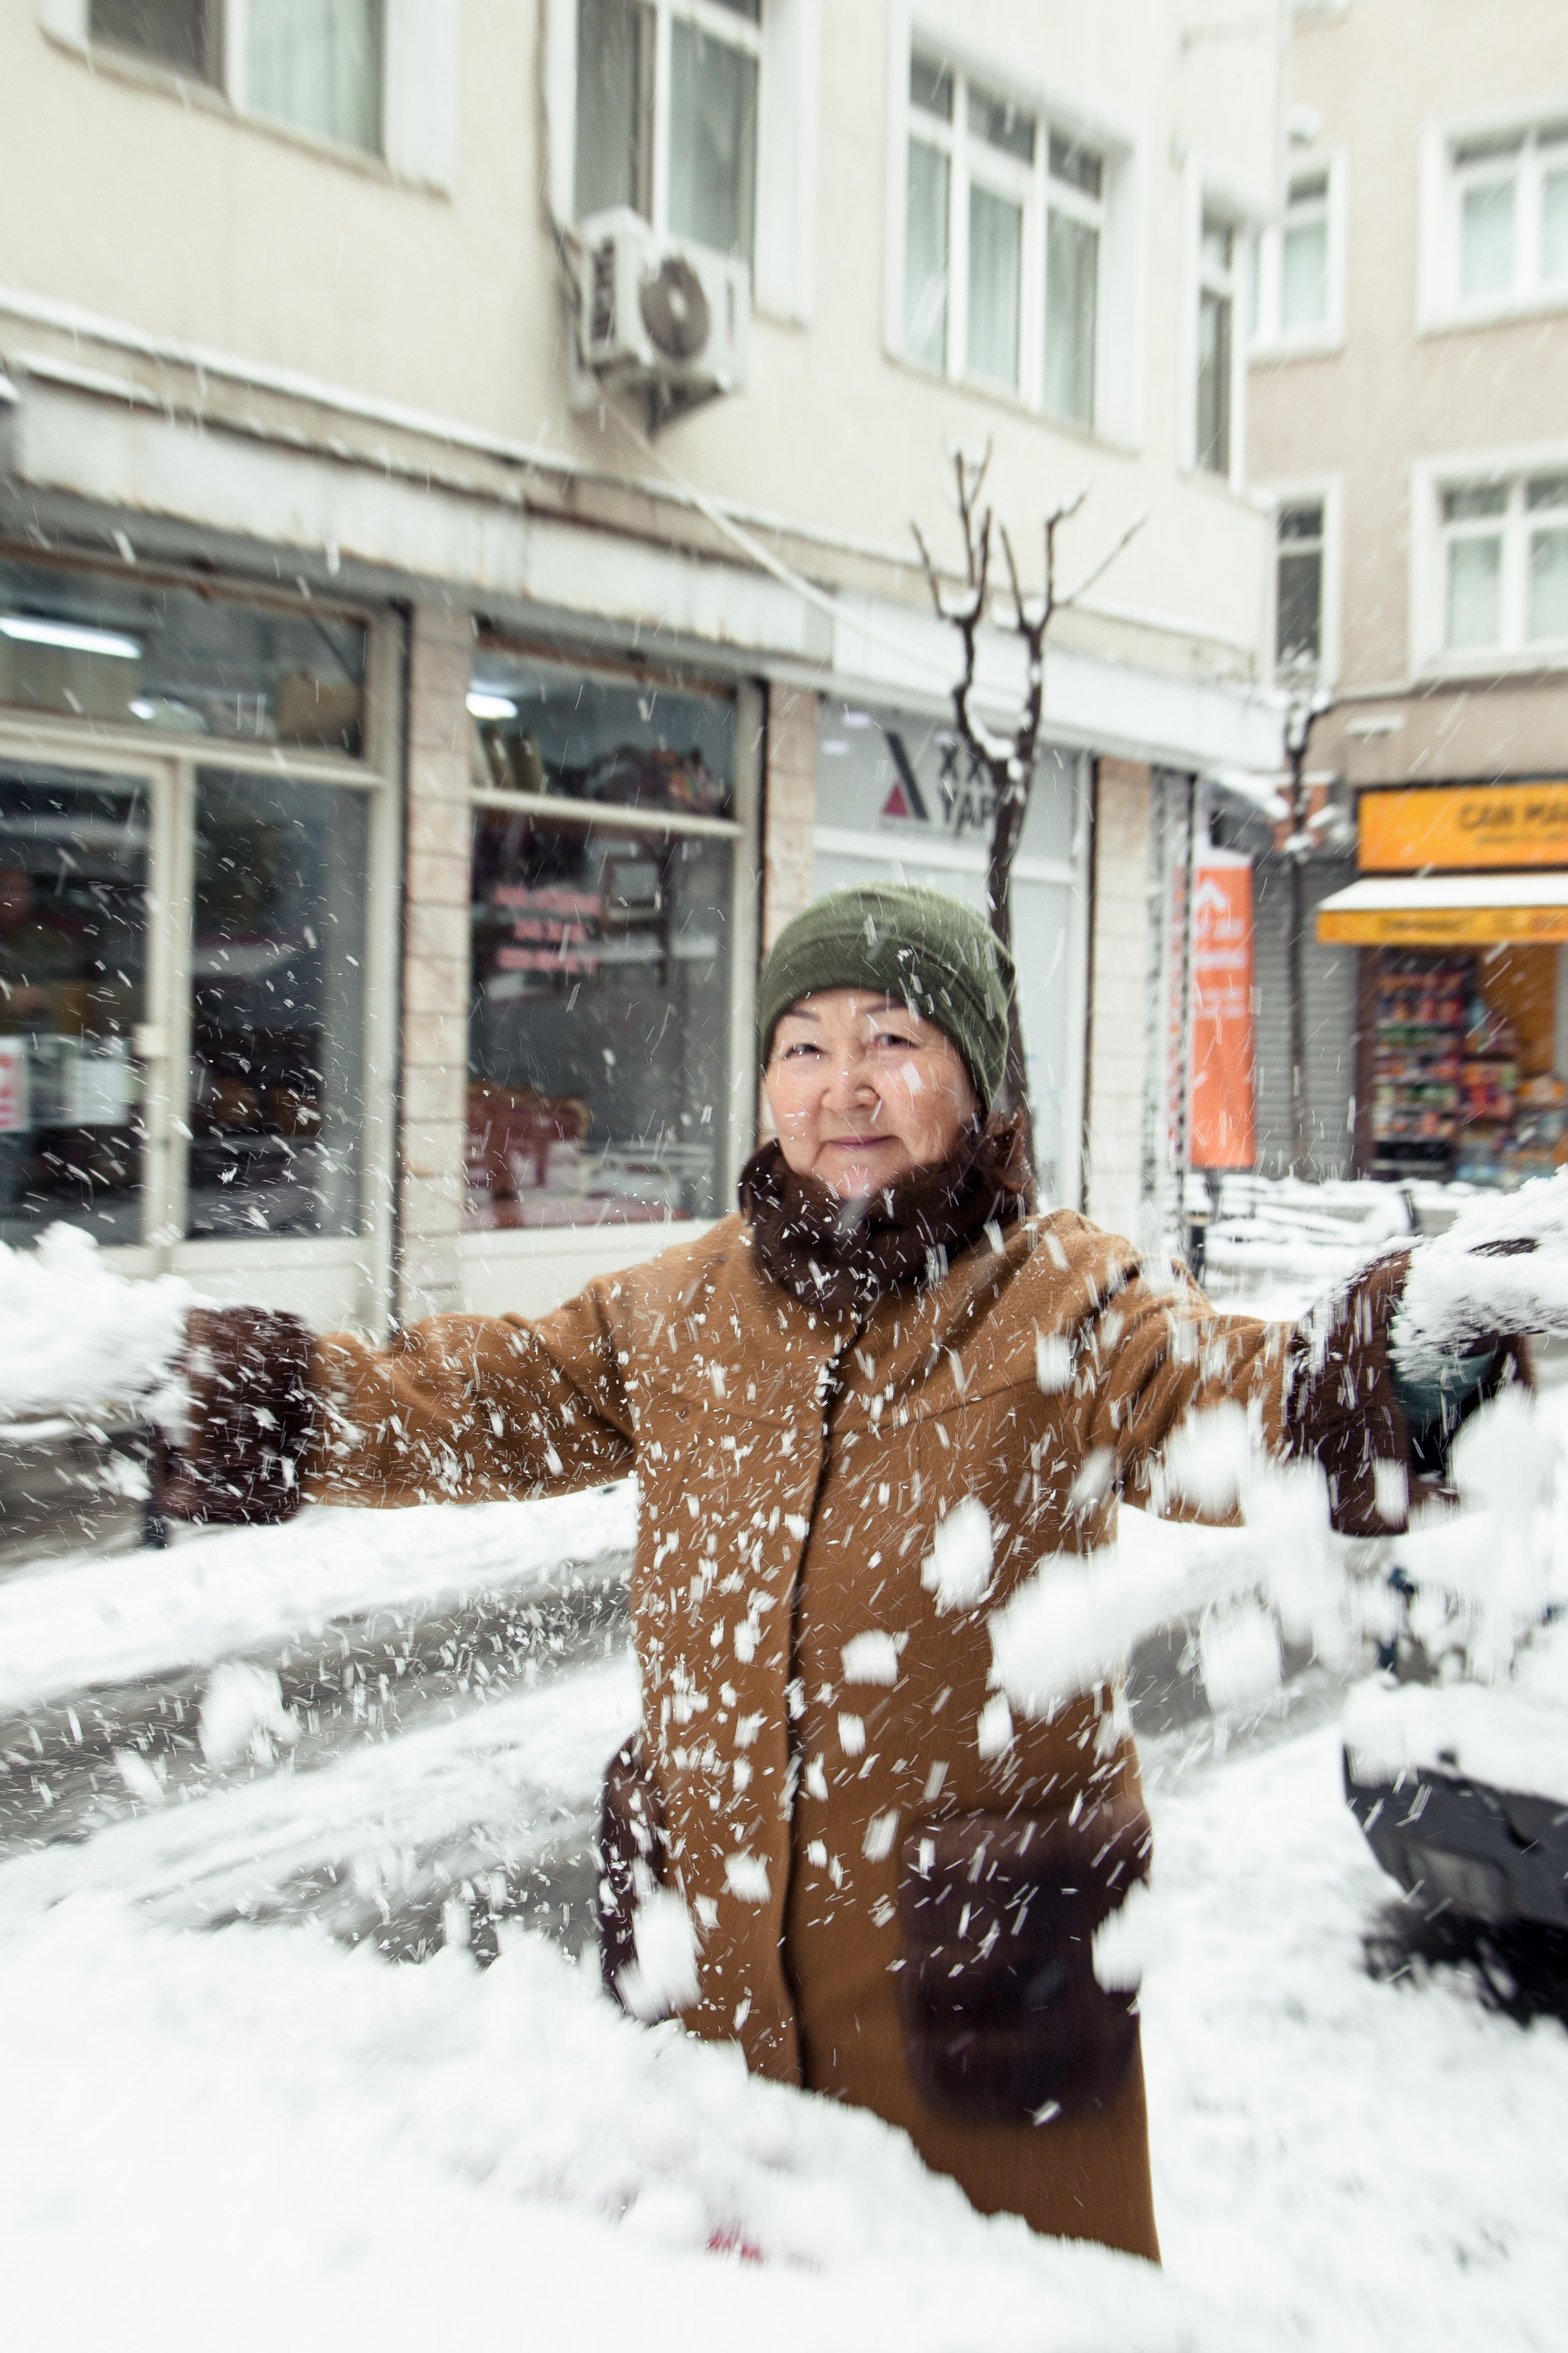 Pictured - A senior Asian woman throwing snow on the street daylight  | Source: Pexels 